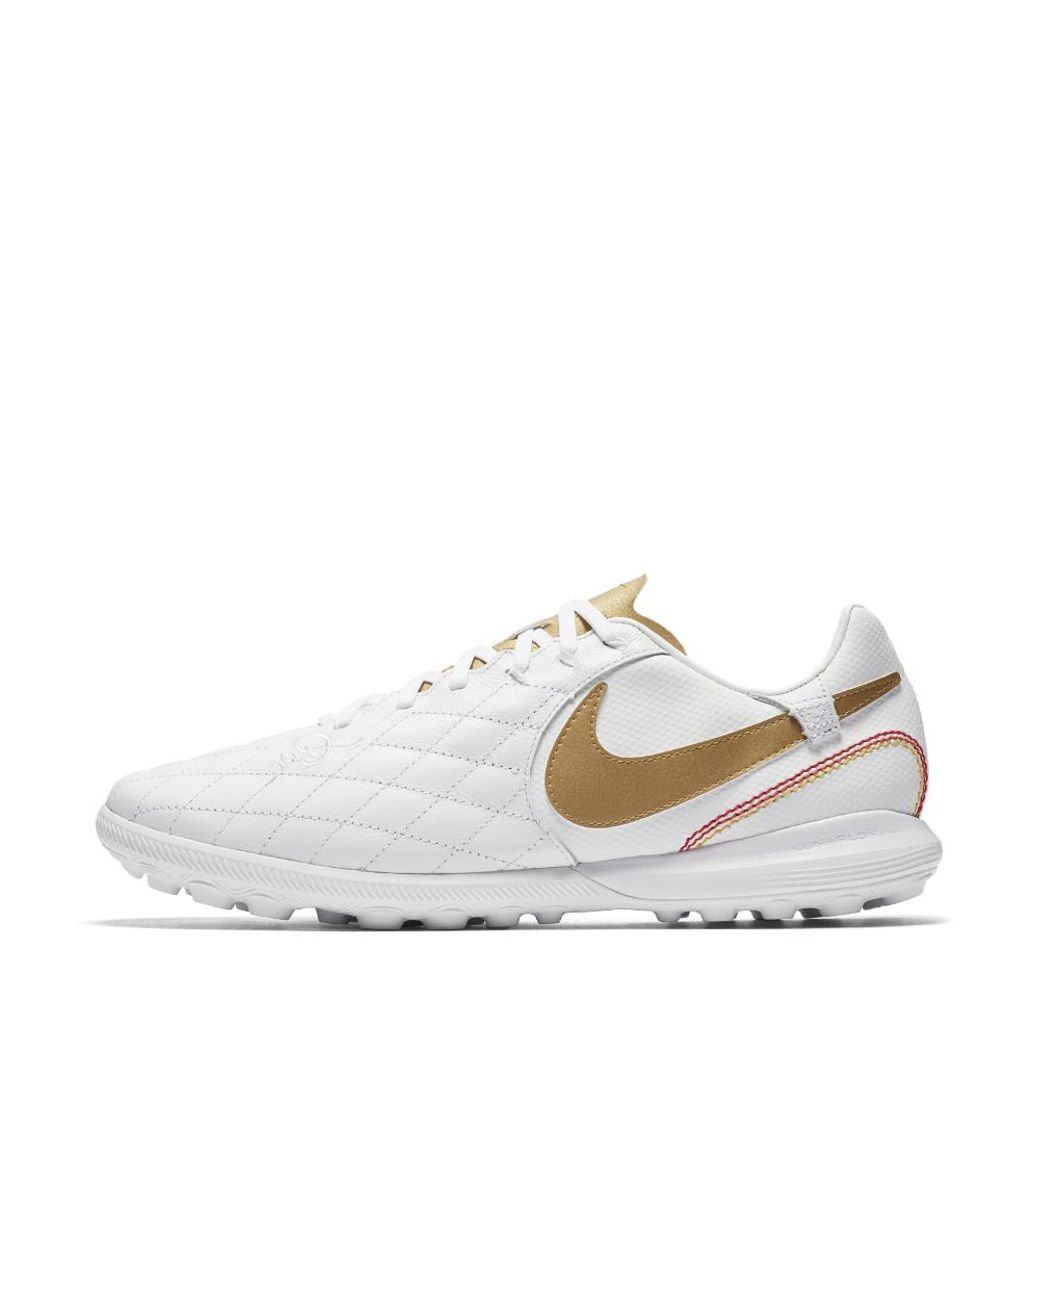 Nike Leather Tiempox Lunar Legend Vii Pro 10r Artificial-turf Soccer Shoe  in White/White/Metallic Gold (White) for Men | Lyst